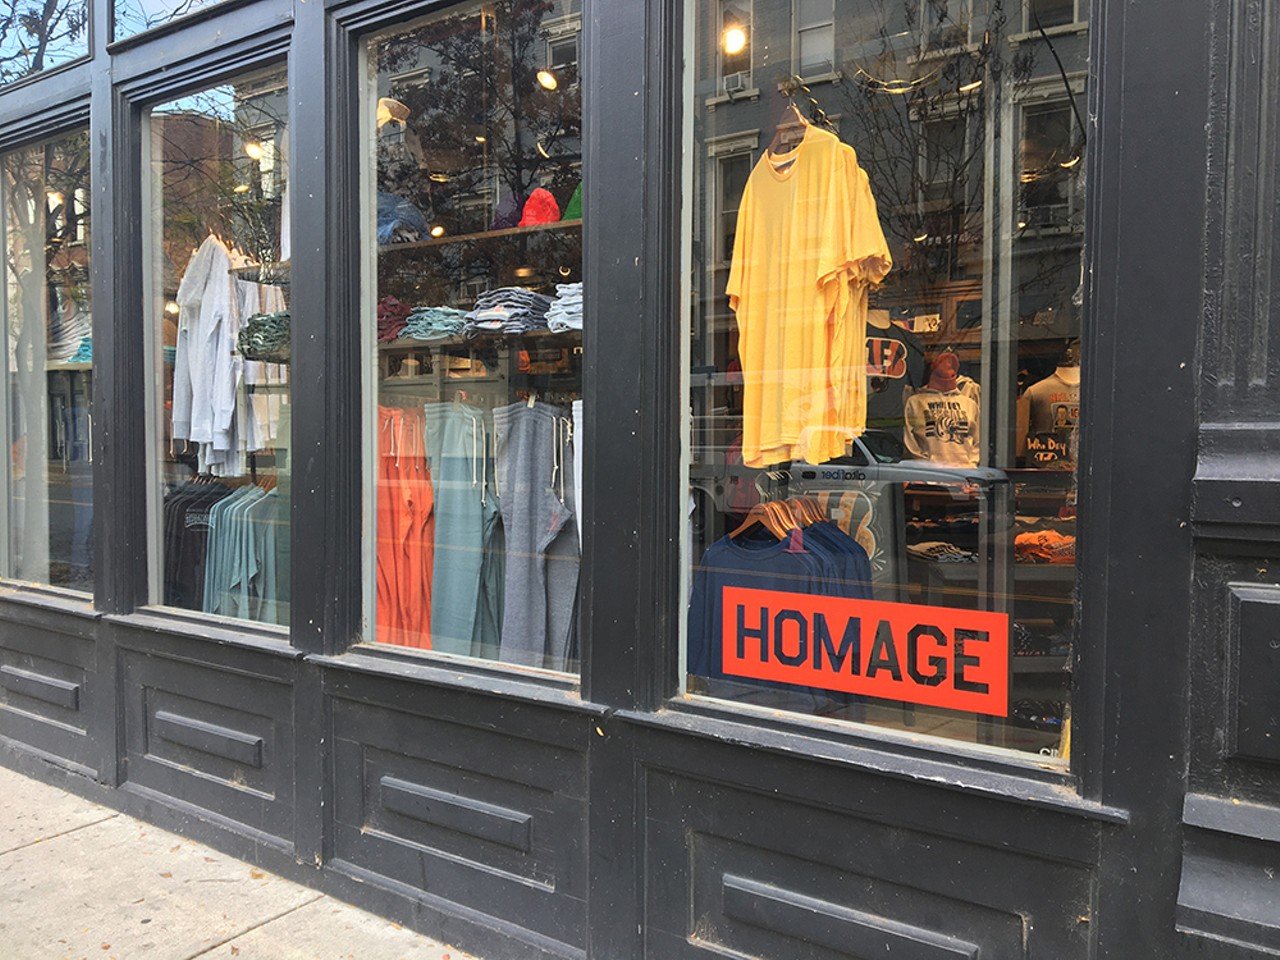 HOMAGE
1232 Vine St., Over-the-Rhine
Whether you’re shopping for a loyal UC Bearcat, dedicated OSU Buckeye or die-hard Xavier Muskie, HOMAGE has the gear to represent their favorite Ohio team, plus duds dedicated to the Bengals, Reds and FC Cincinnati. You’ll also find super-soft shirts, sweatshirts and hats repping Cincinnati classics, like Uncle Woody’s, Skyline, Little Kings and Kings Island, all designed in a vintage style. Not a sports fan? HOMAGE also sells clothing with pop culture references
from classic ’80s movies to shows like The Office.